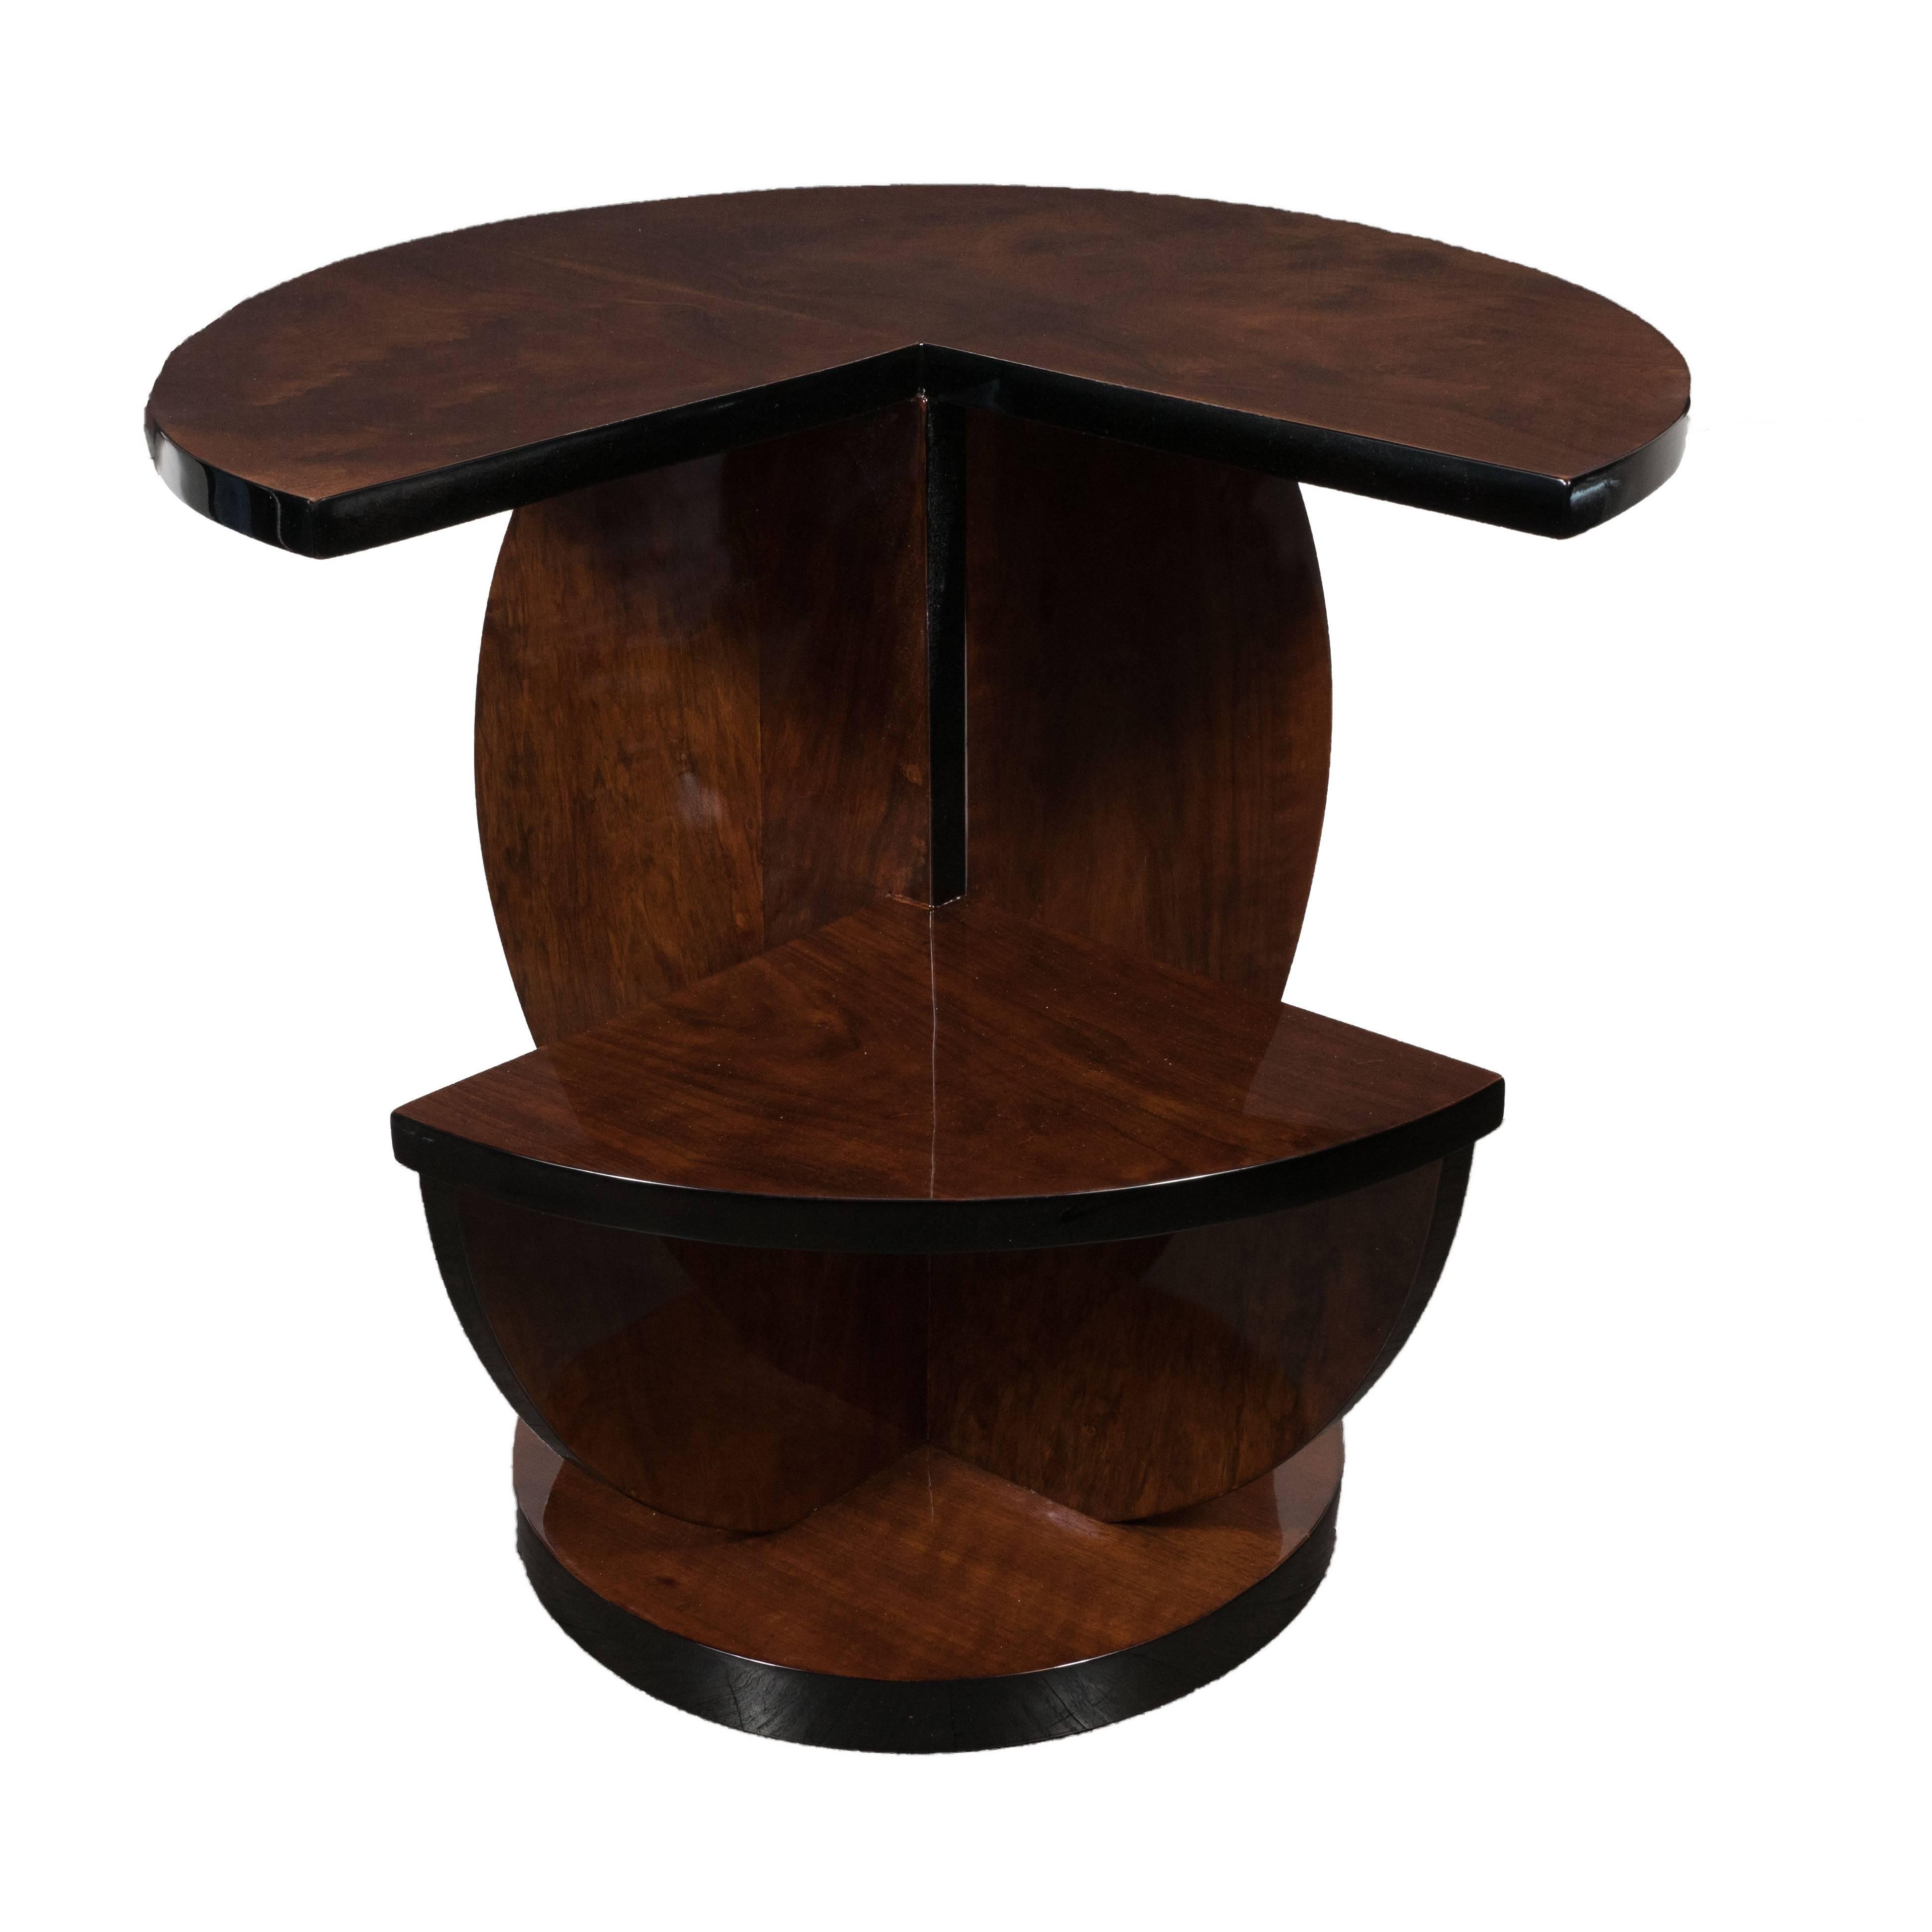 This elegant and graphic side table was realized in France, circa 1935, but appears as modern as ever. It offers two tiers composed of bookmatched burled walnut circumscribed with black lacquer around the curved edges of each form. The top tier